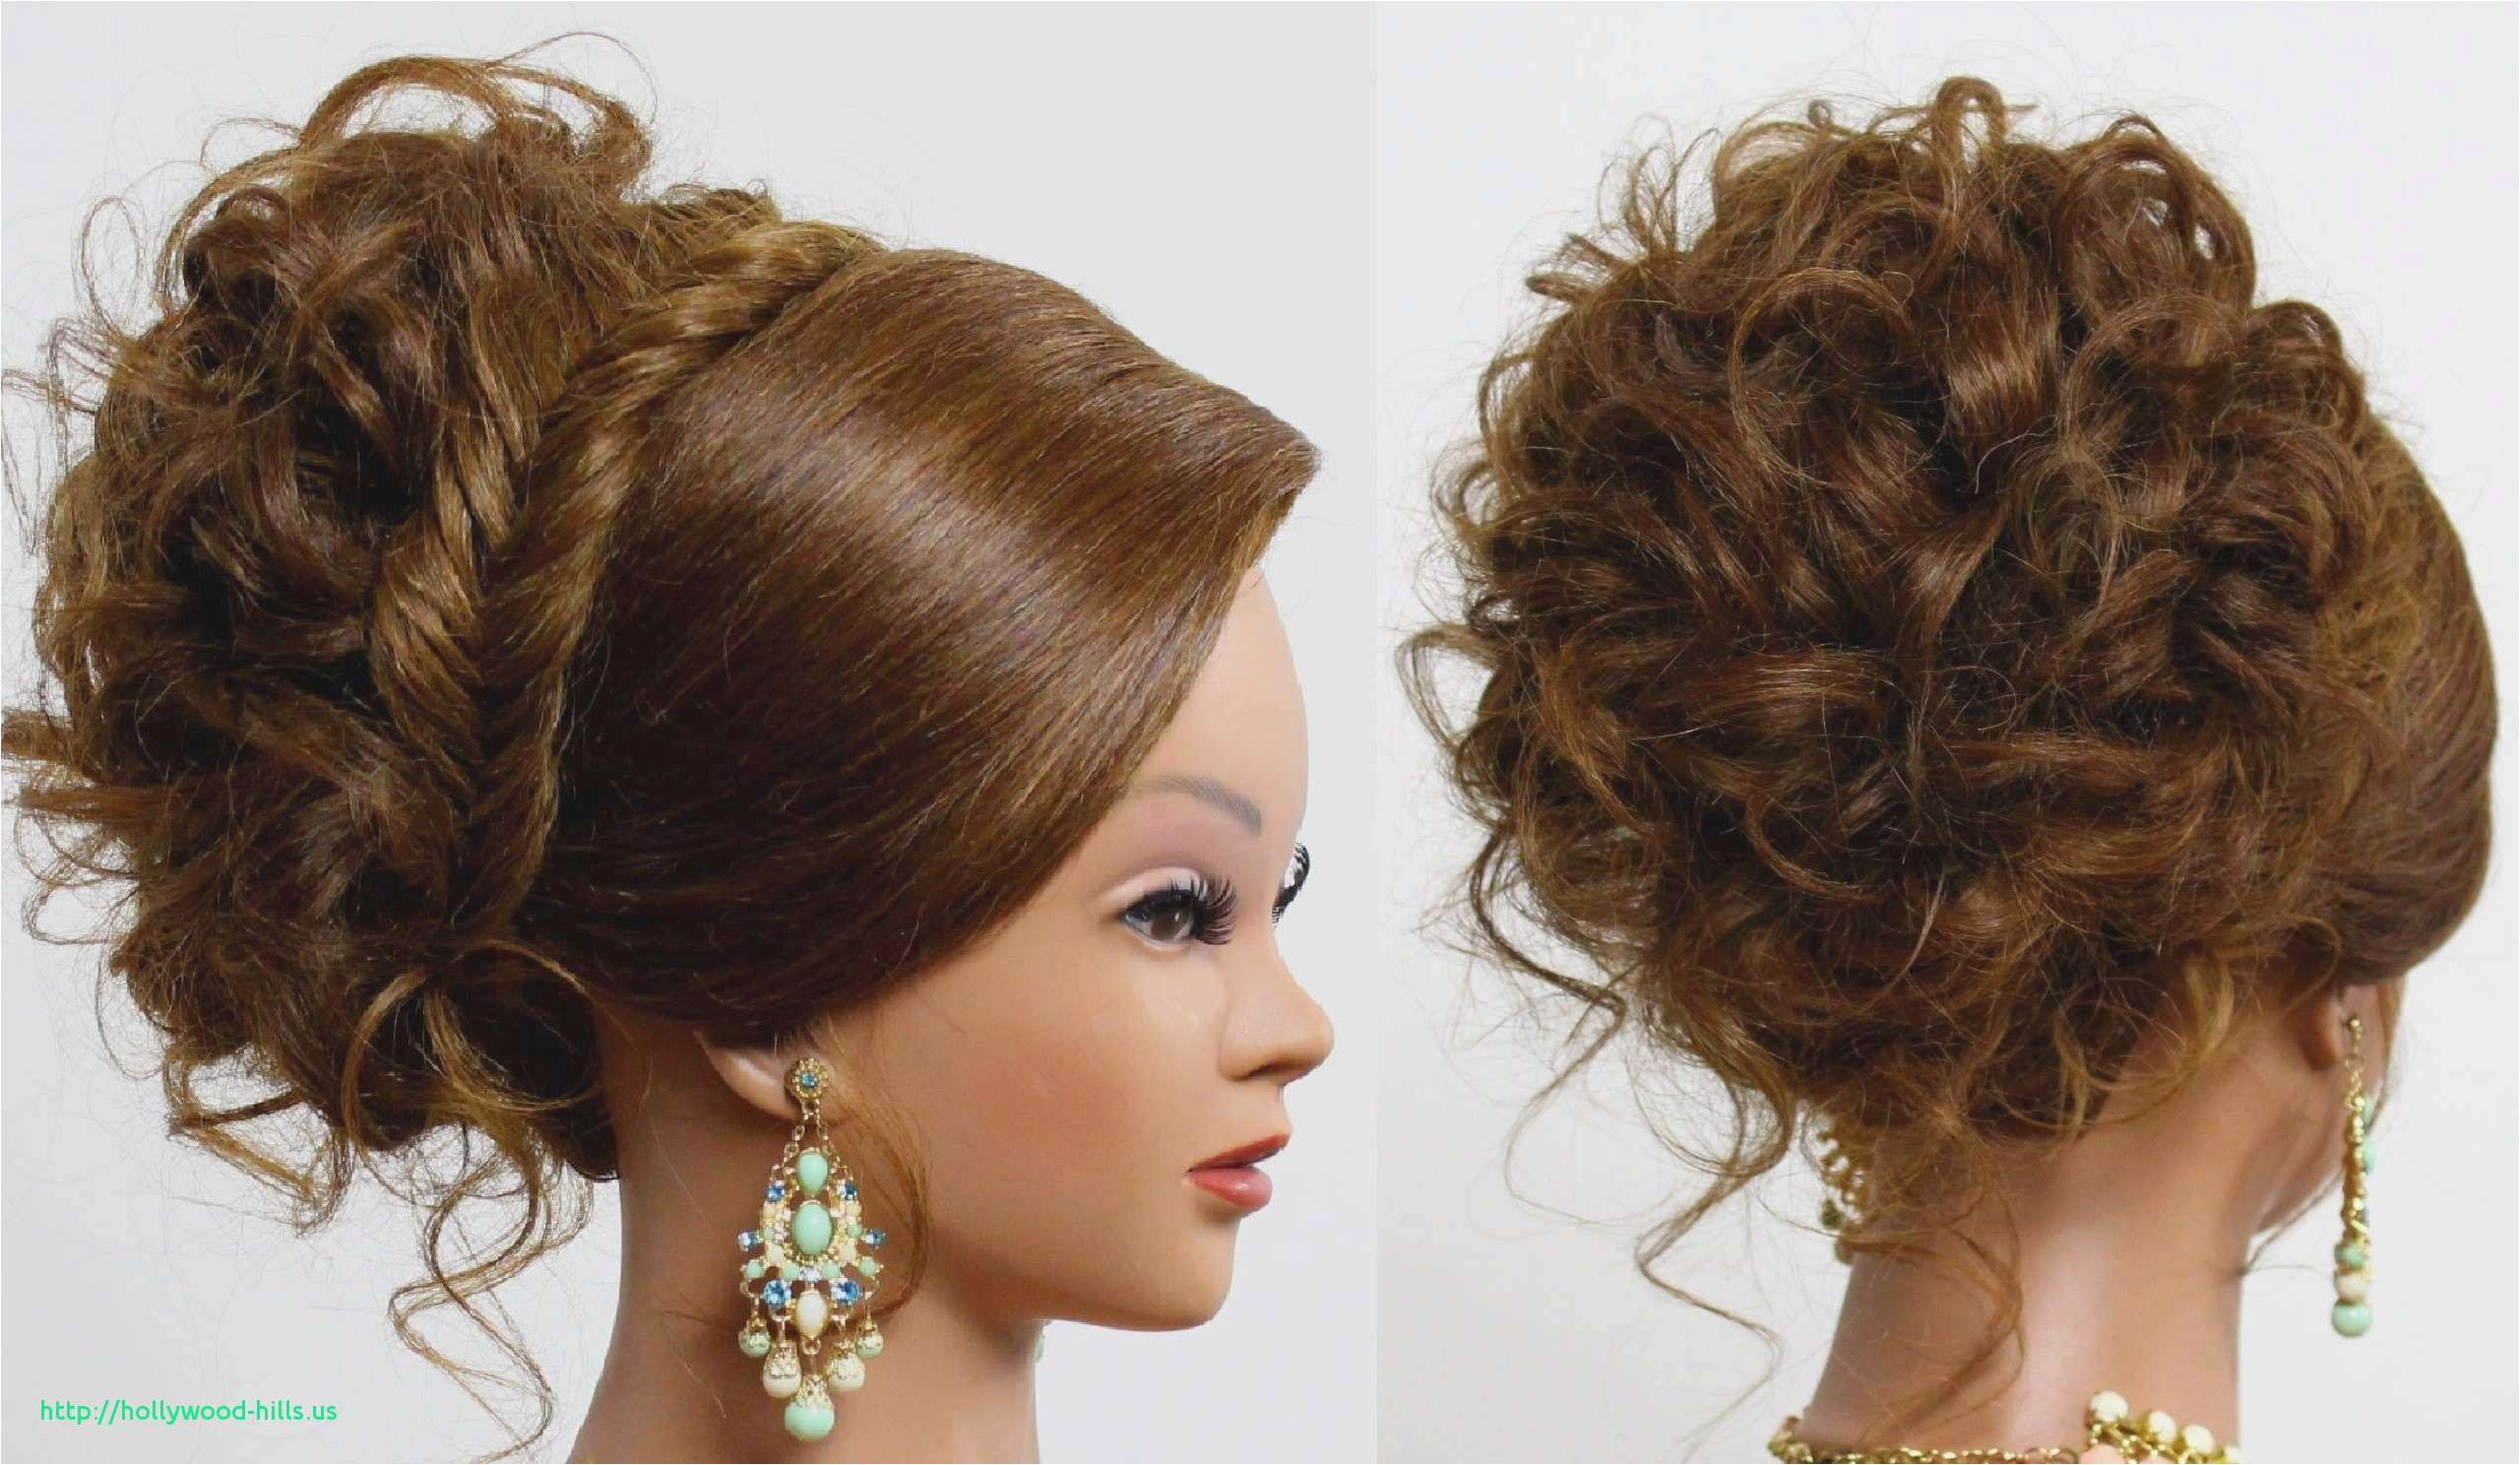 80s Prom Hairstyles Elegant Elegant evening Hairstyles for Long Hair Awesome Haircuts 0d 80s